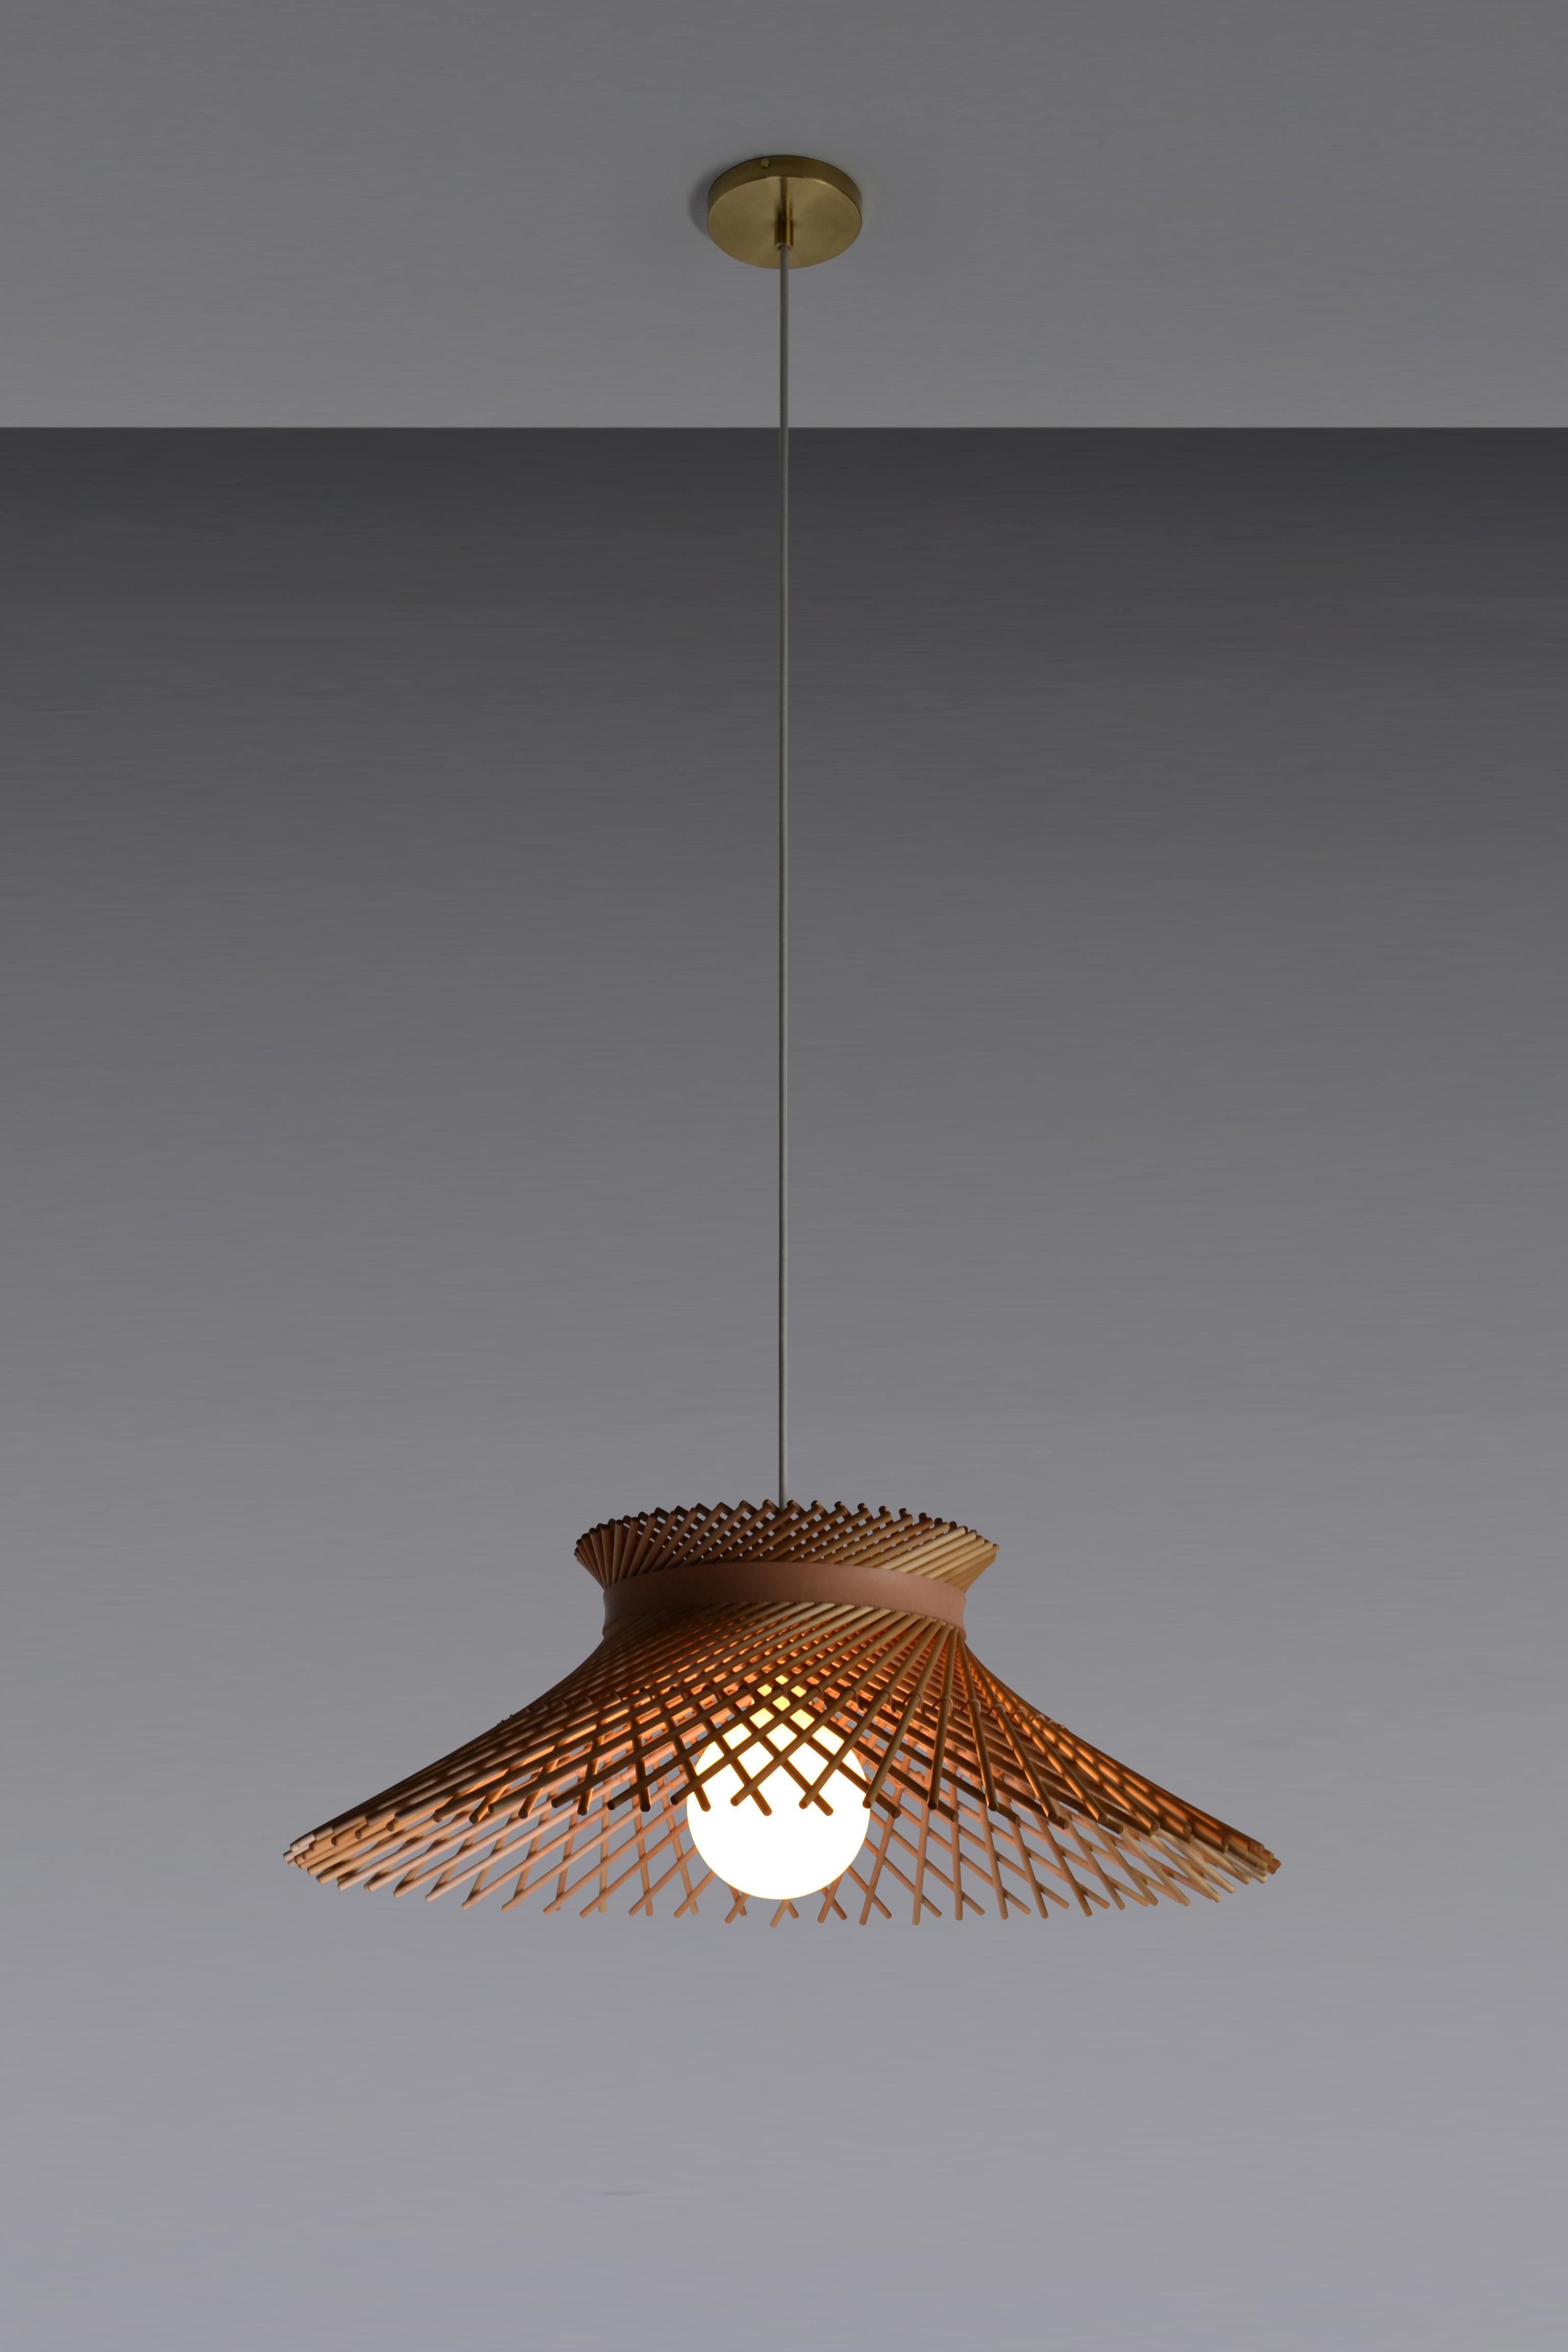 American Mooda Ceiling Pendant Light 9 / Natural Maple Wood, Mugla White Marble by INDO- For Sale